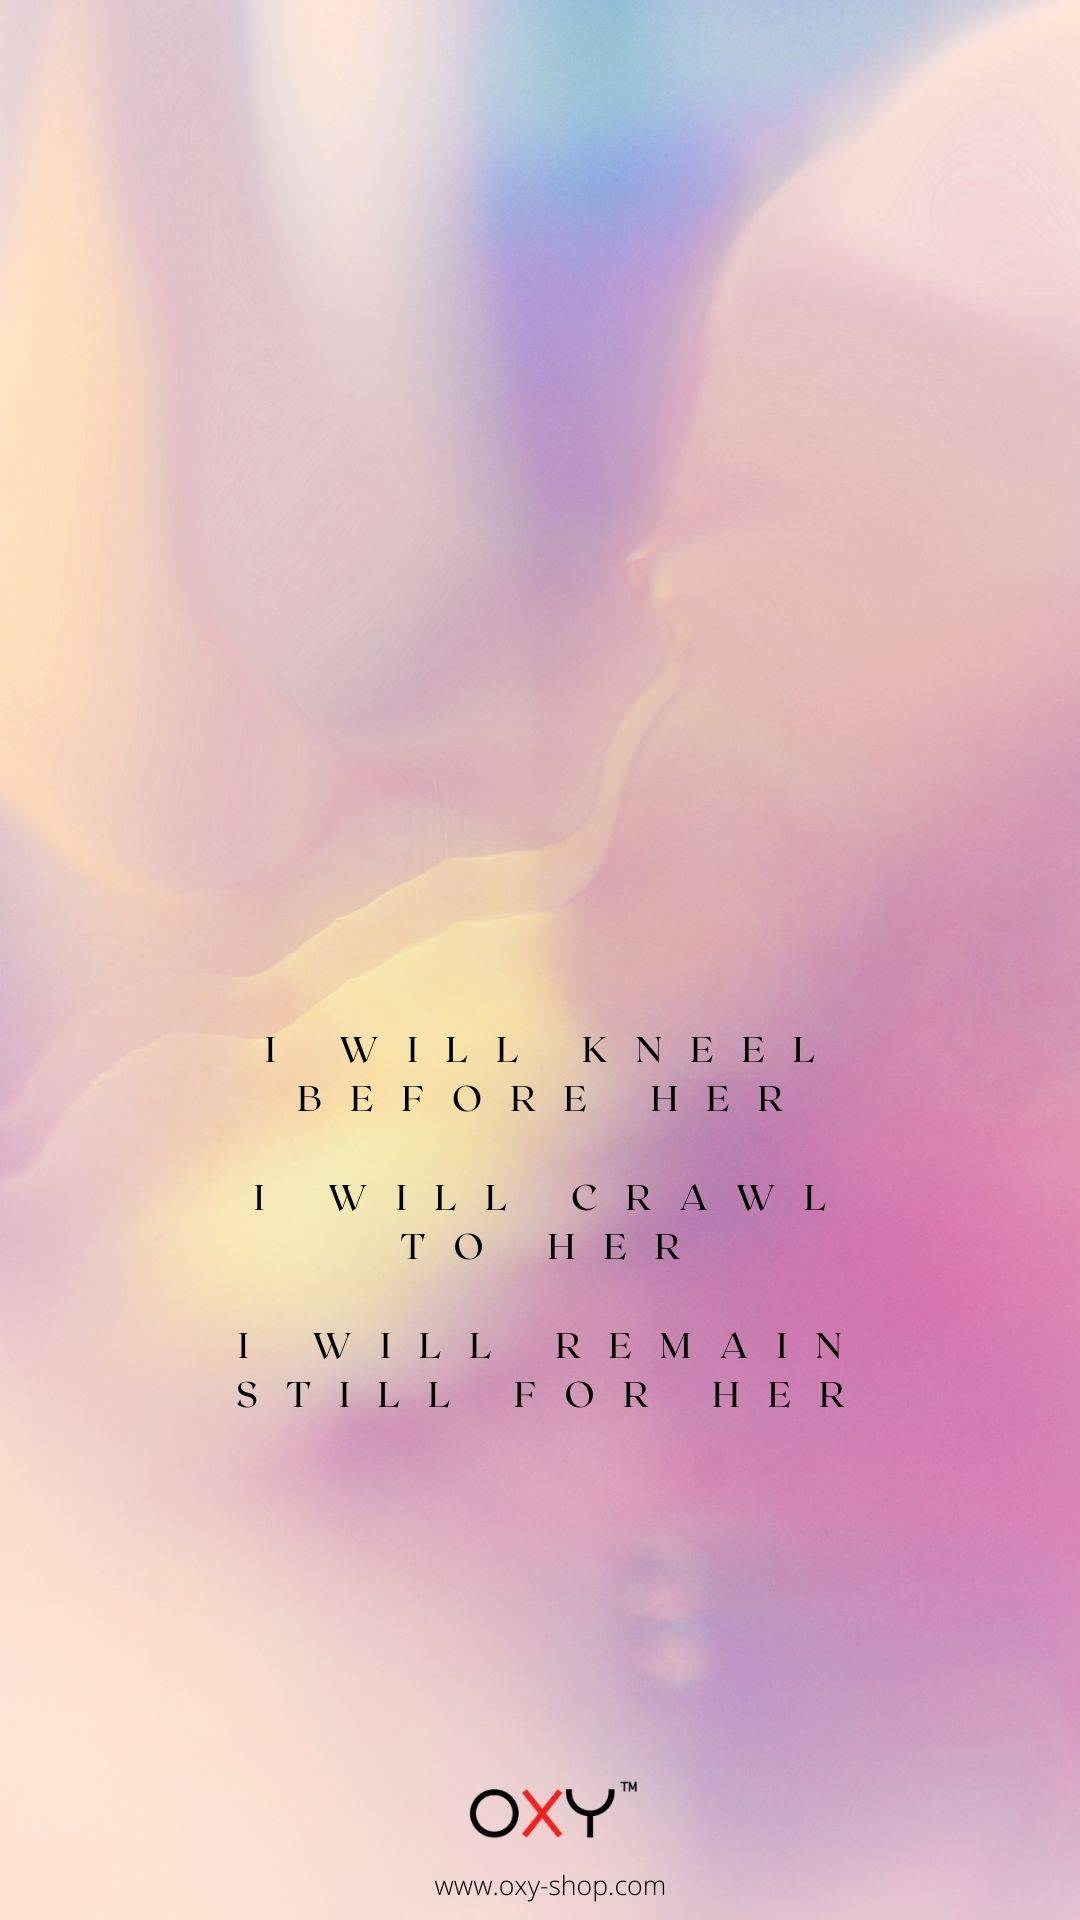 I will kneel before her I will crawl to her I will remain still for her. - BDSM wallpaper